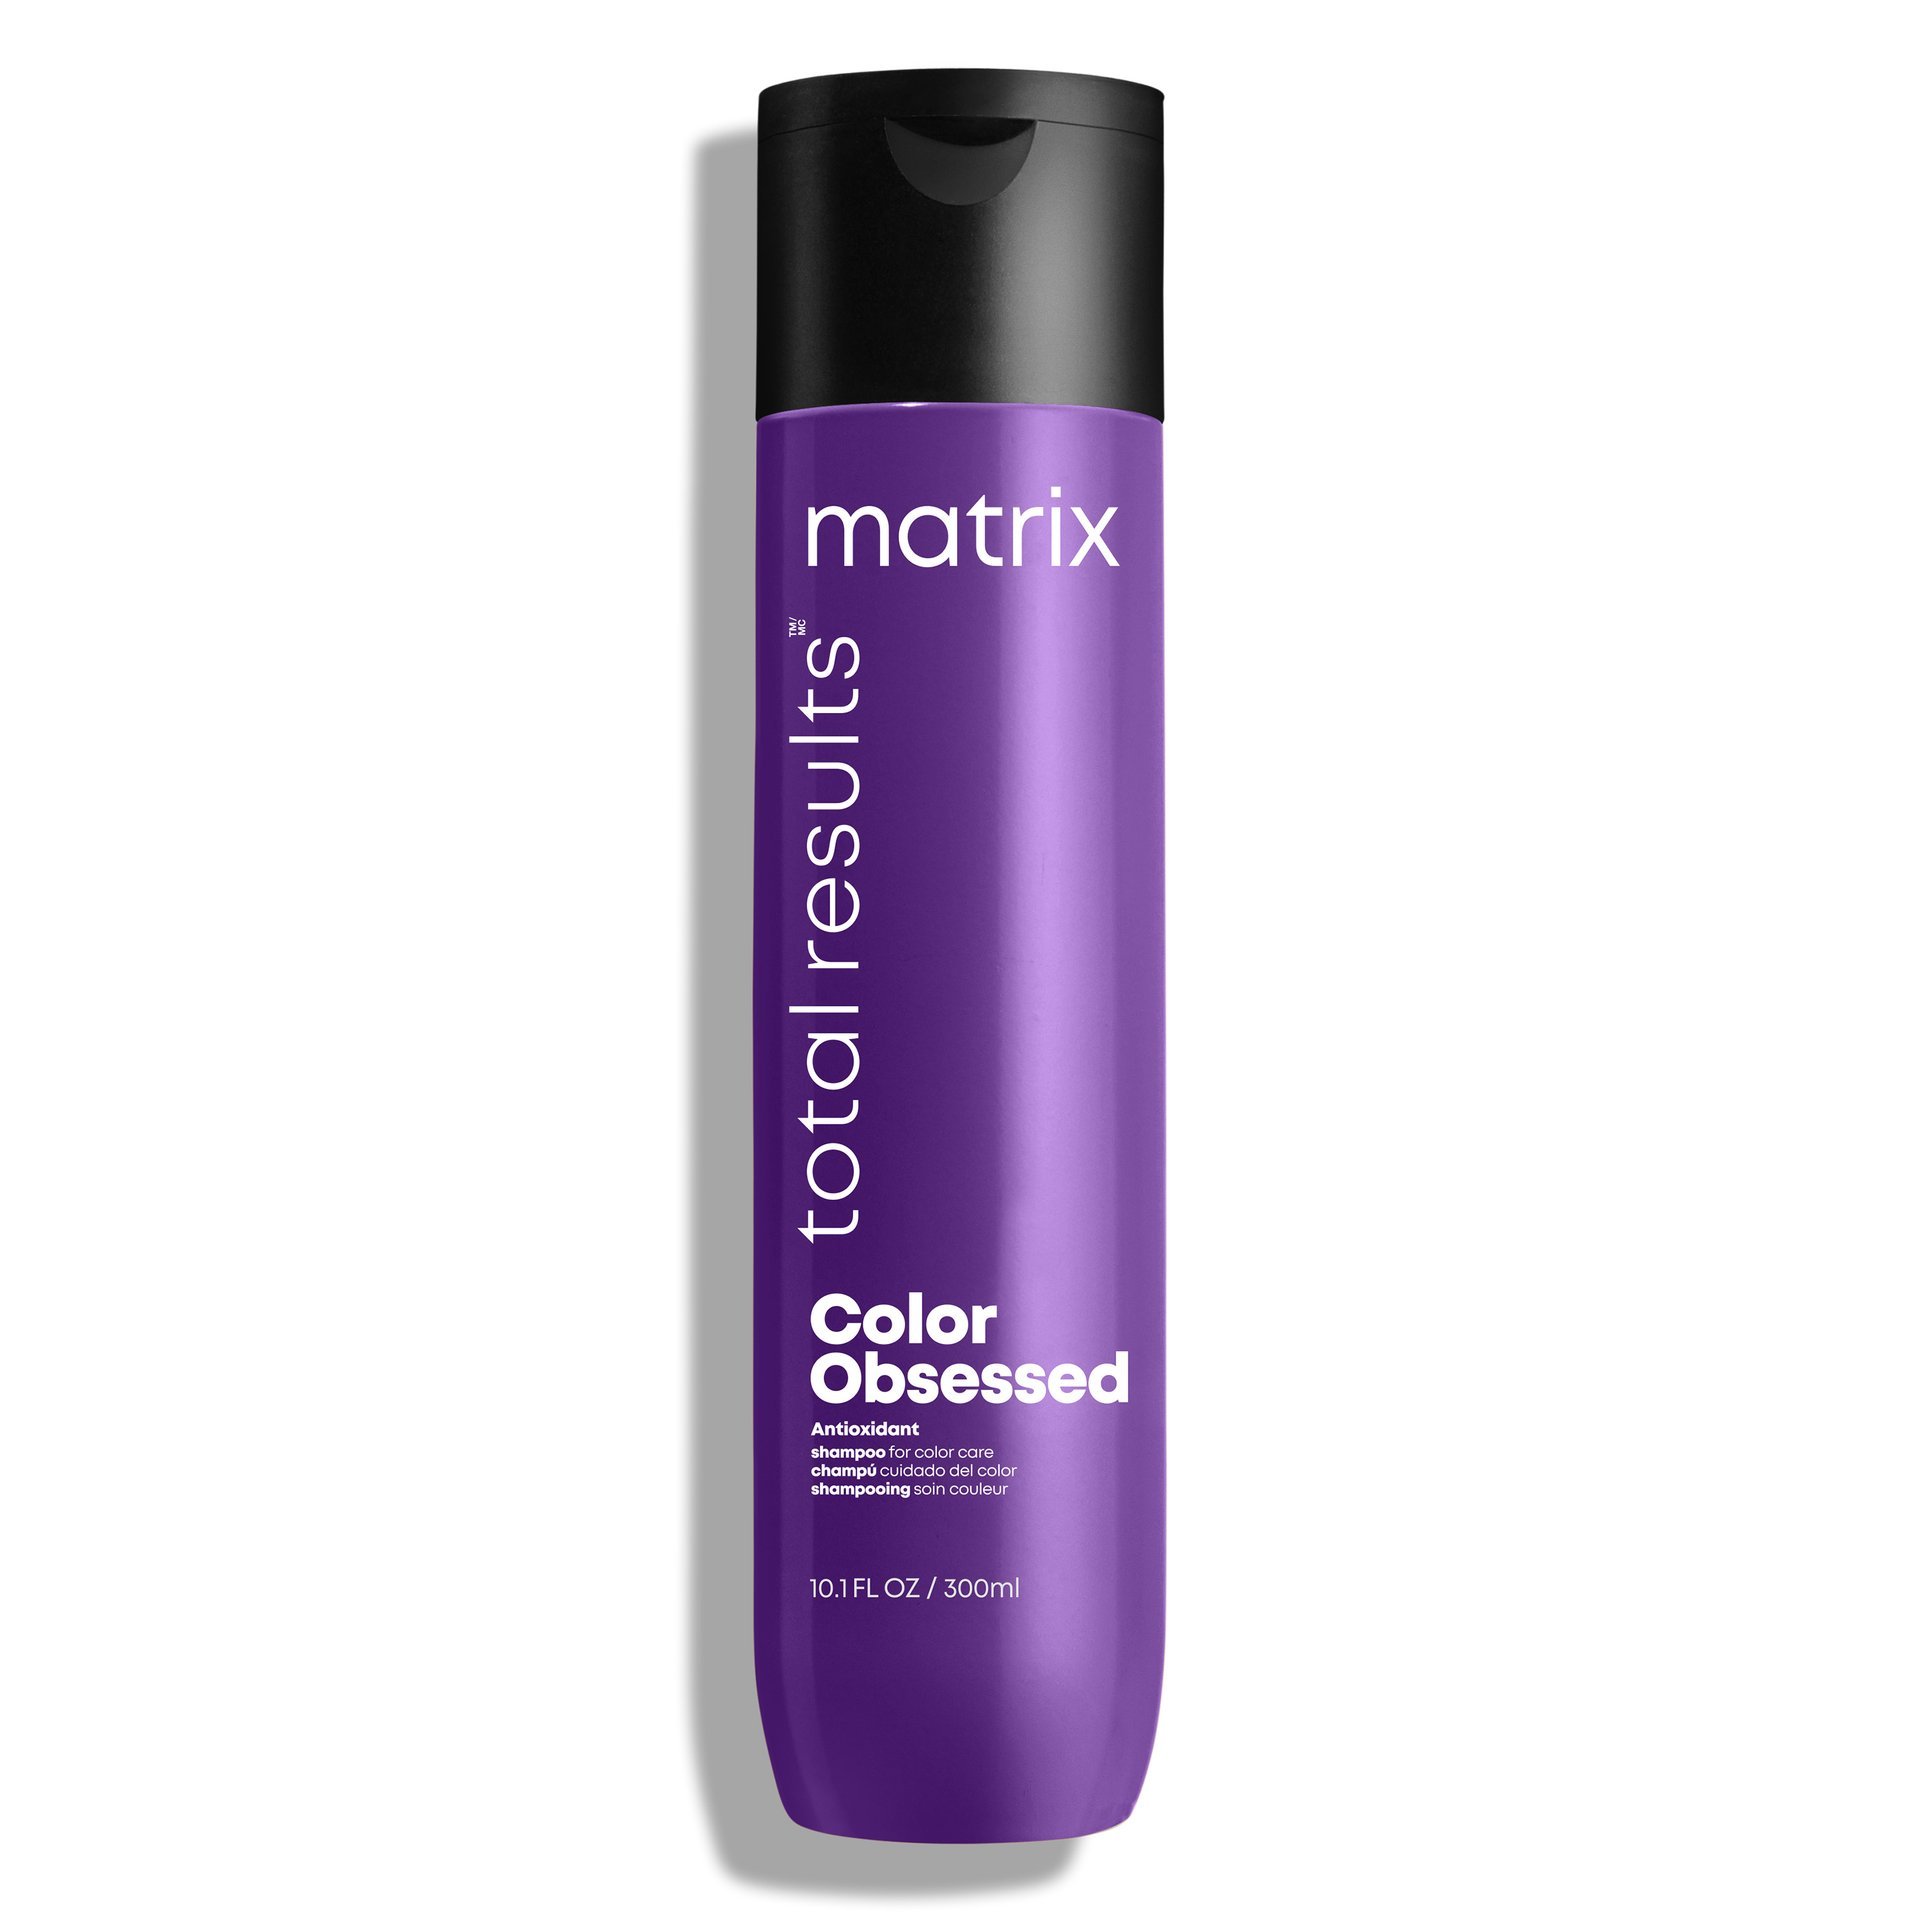 Amazoncom Matrix Color Obsessed Antioxidant Shampoo  Enhances Hair Color   Prevents Fading  For Color Treated Hair  Cruelty Free  Salon Shampoo   Packaging May Vary  Beauty  Personal Care